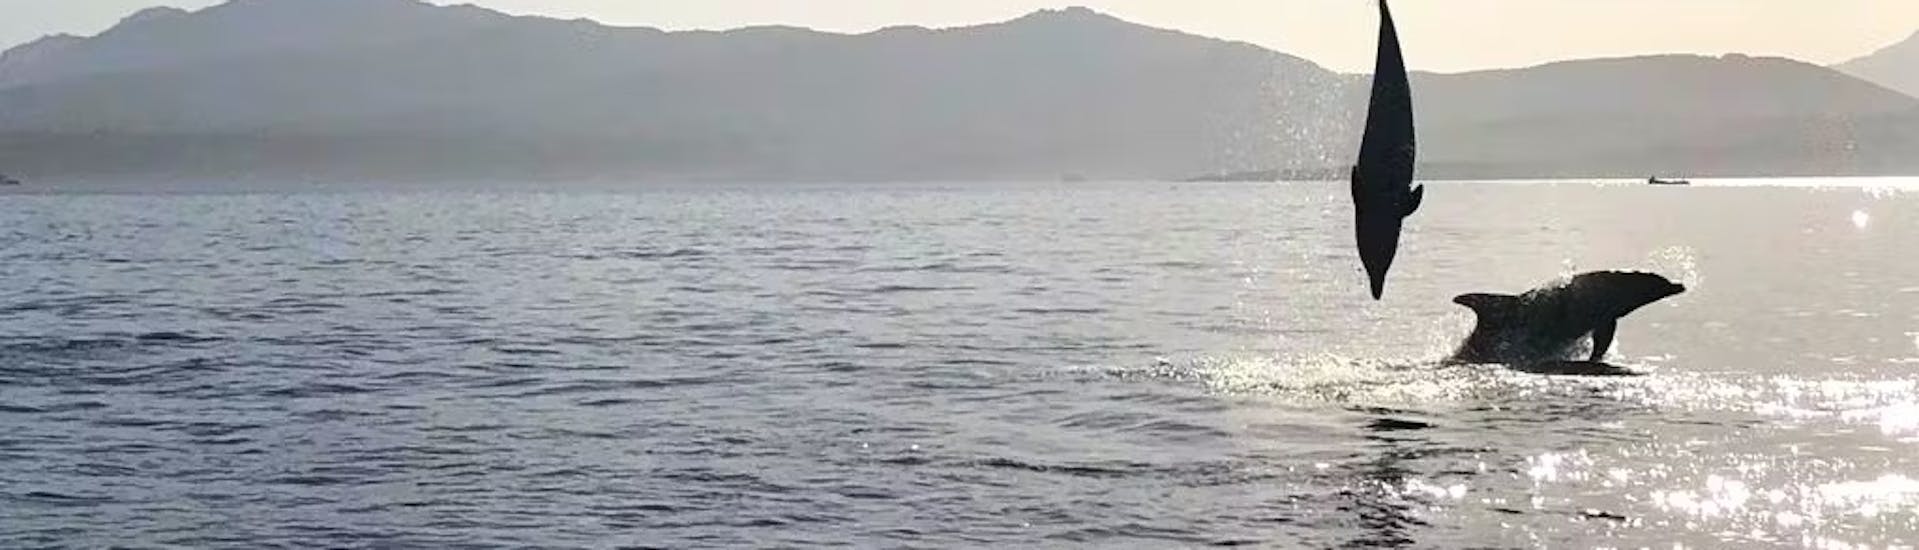 Some dolphins are jumping in the water during the RIB Boat Trip in Golfo Aranci with Dolphin Watching and Guided Snorkeling from Olbia.